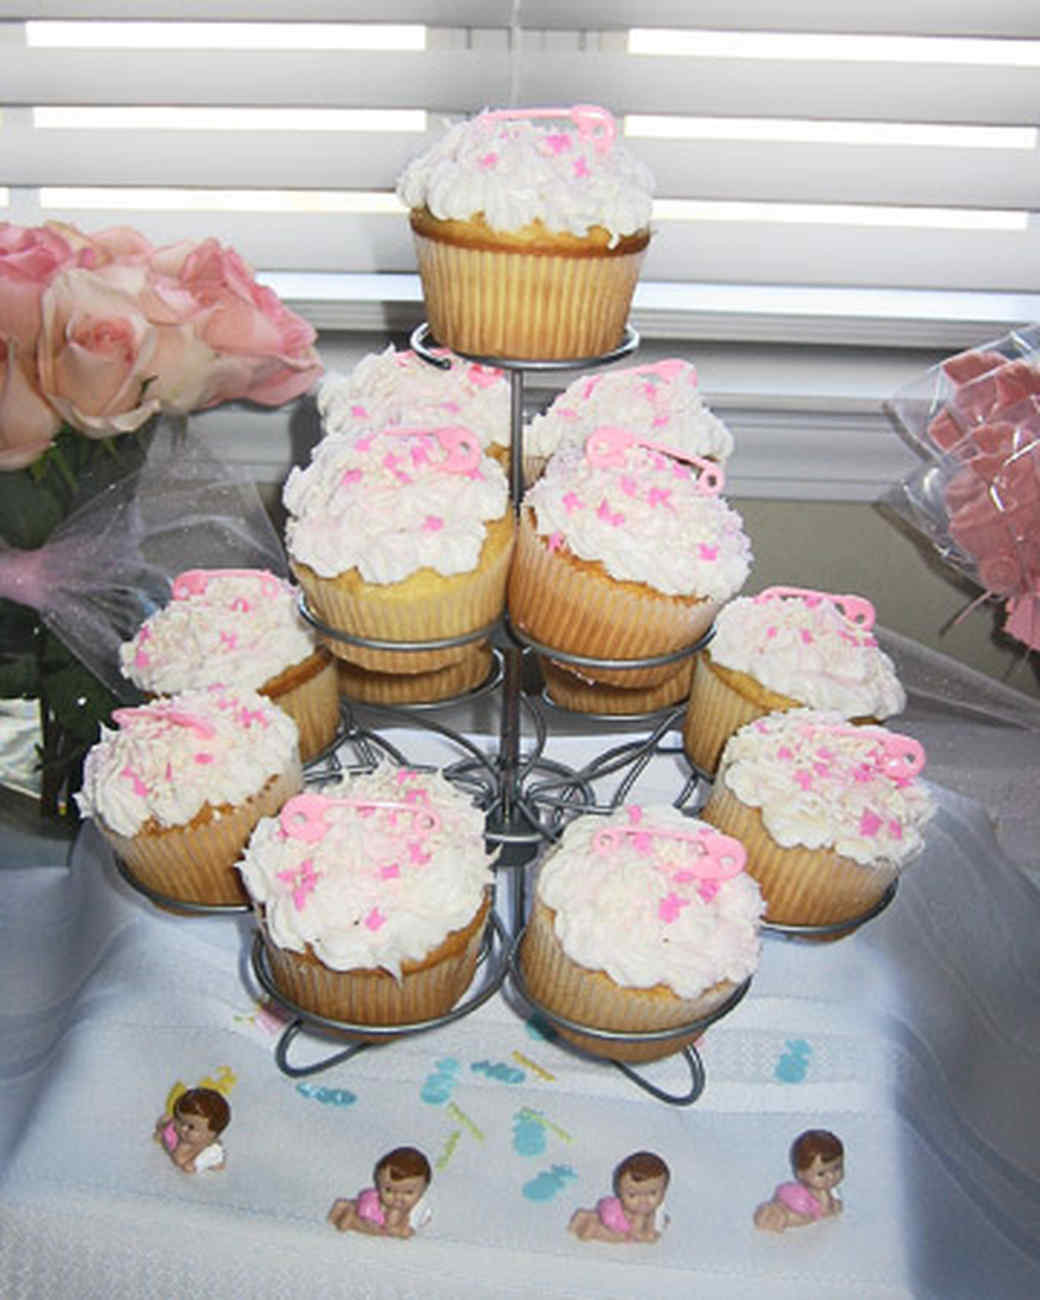 Baby Shower Cupcakes For A Girl
 Your Best Cupcakes for Baby Showers